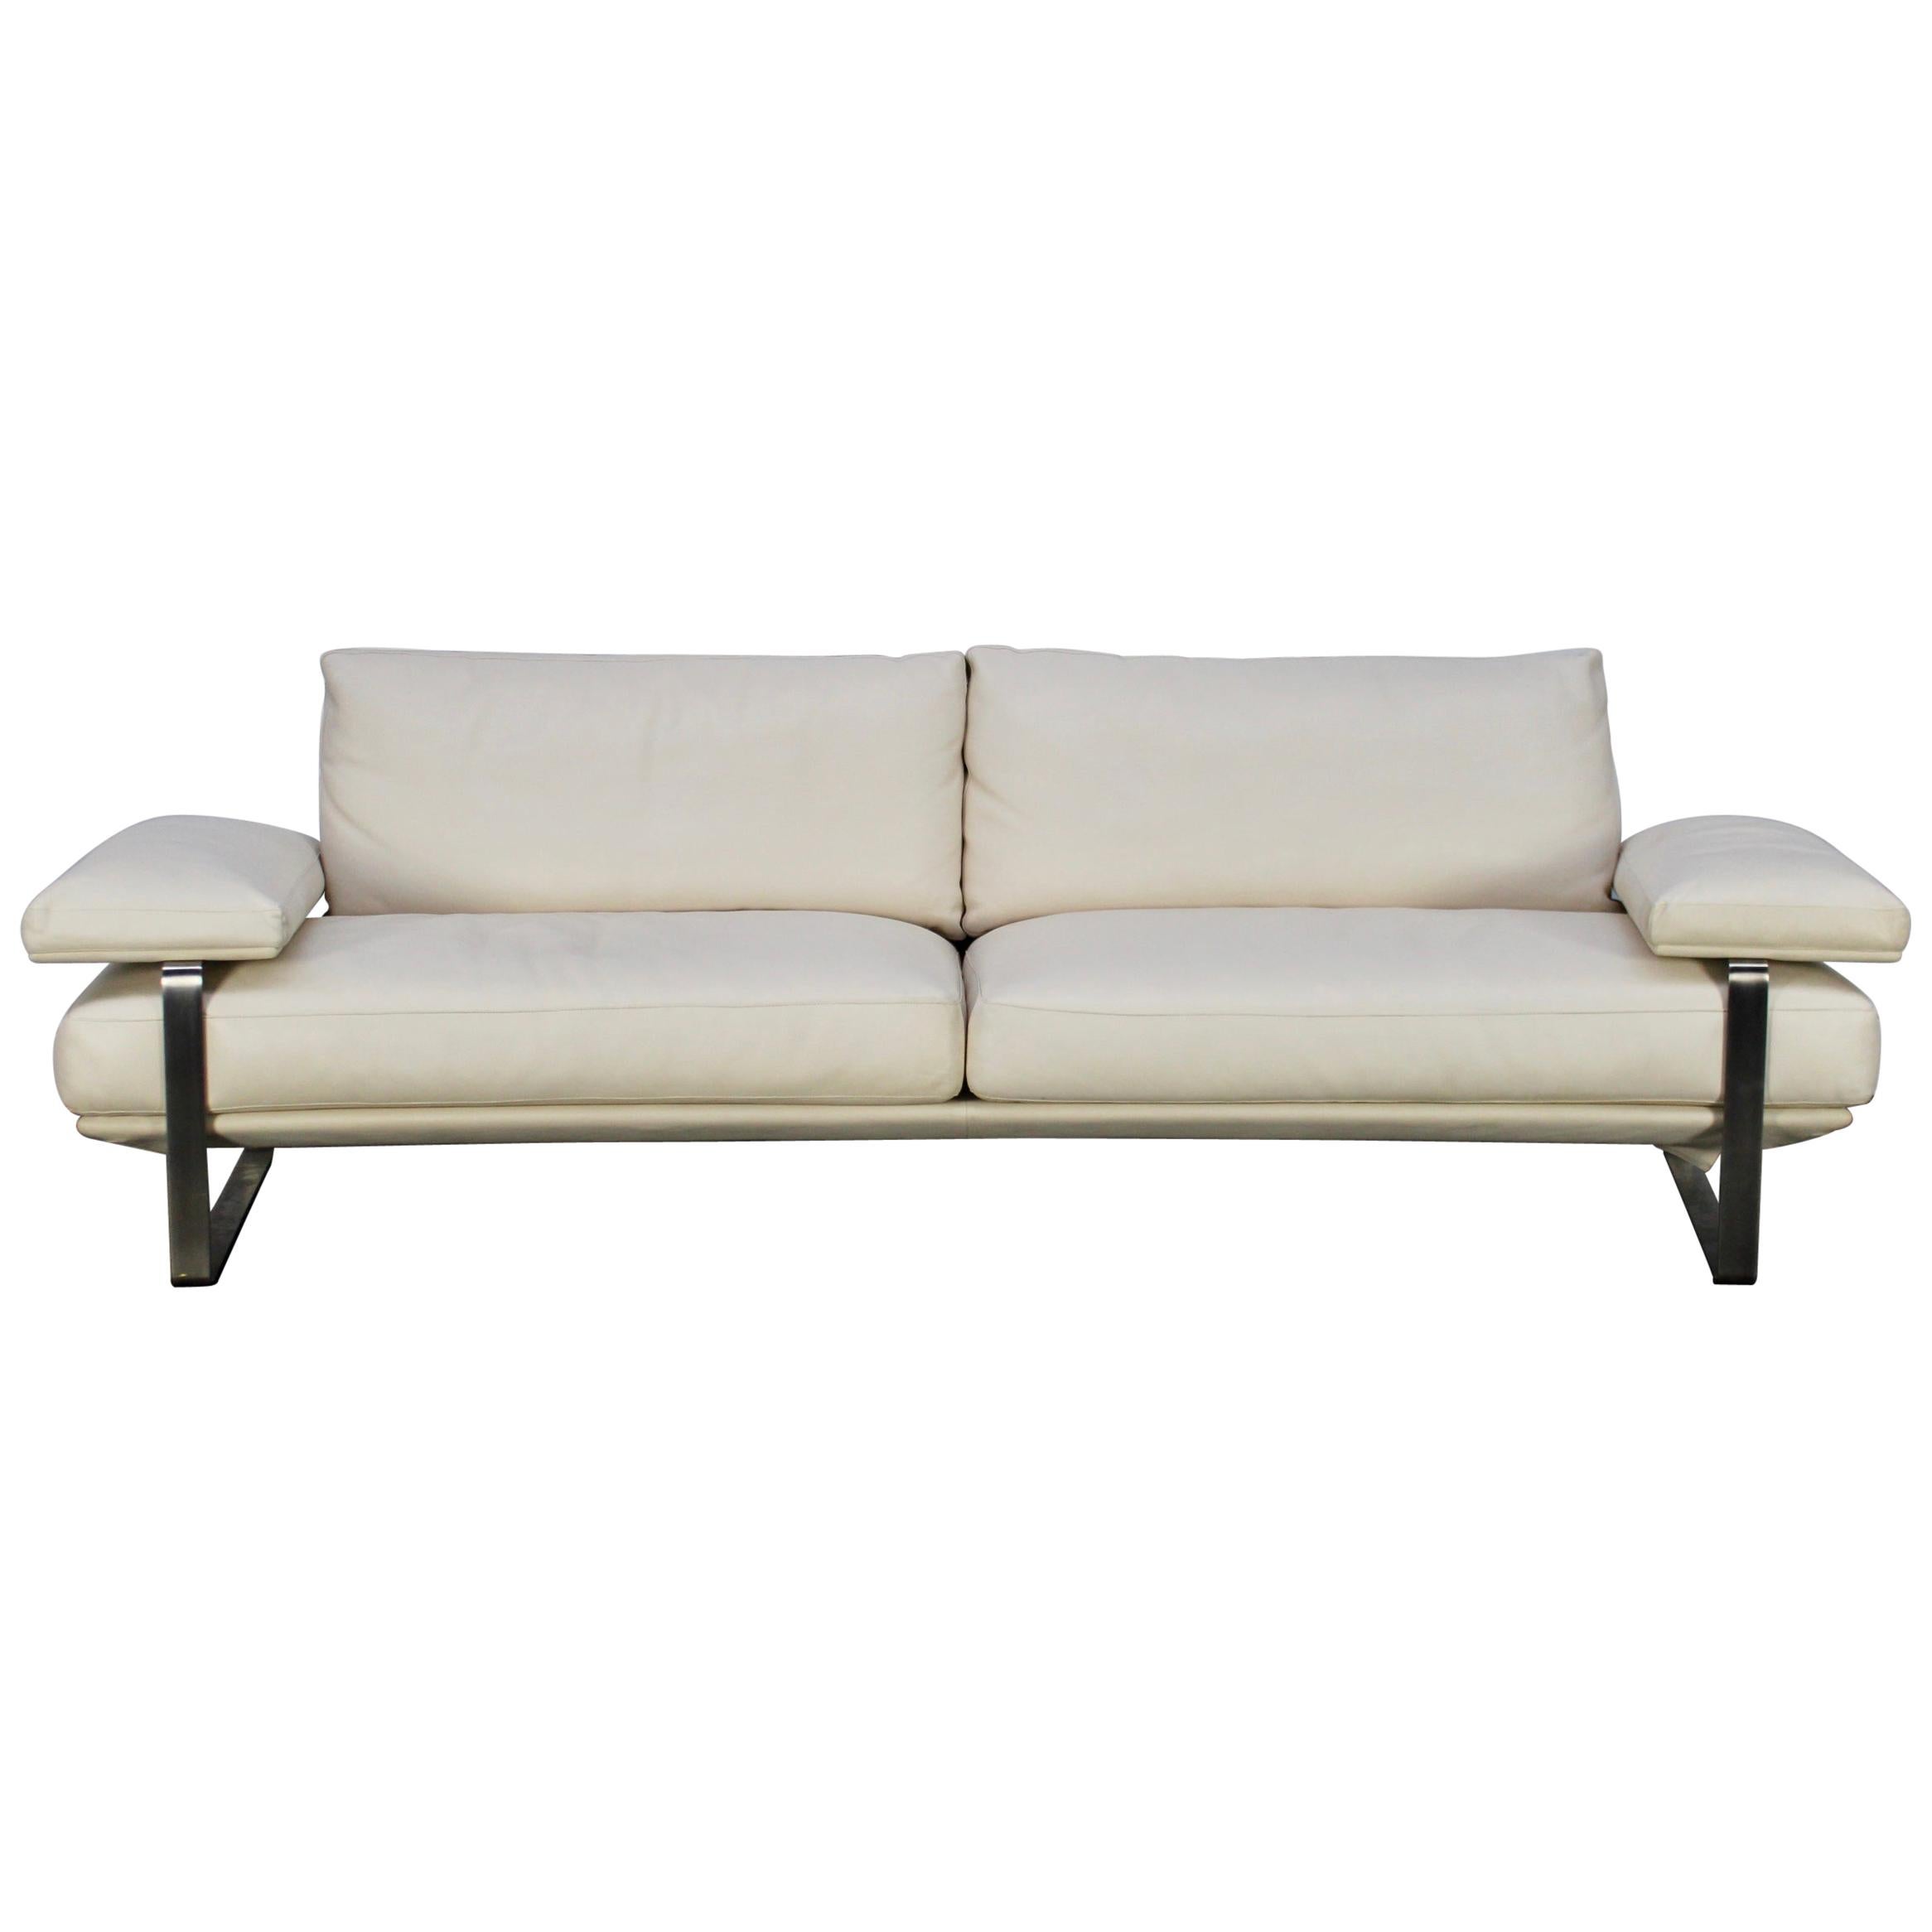 Molteni & C “Still SDC250” Curved Sofa in Ivory Leather For Sale